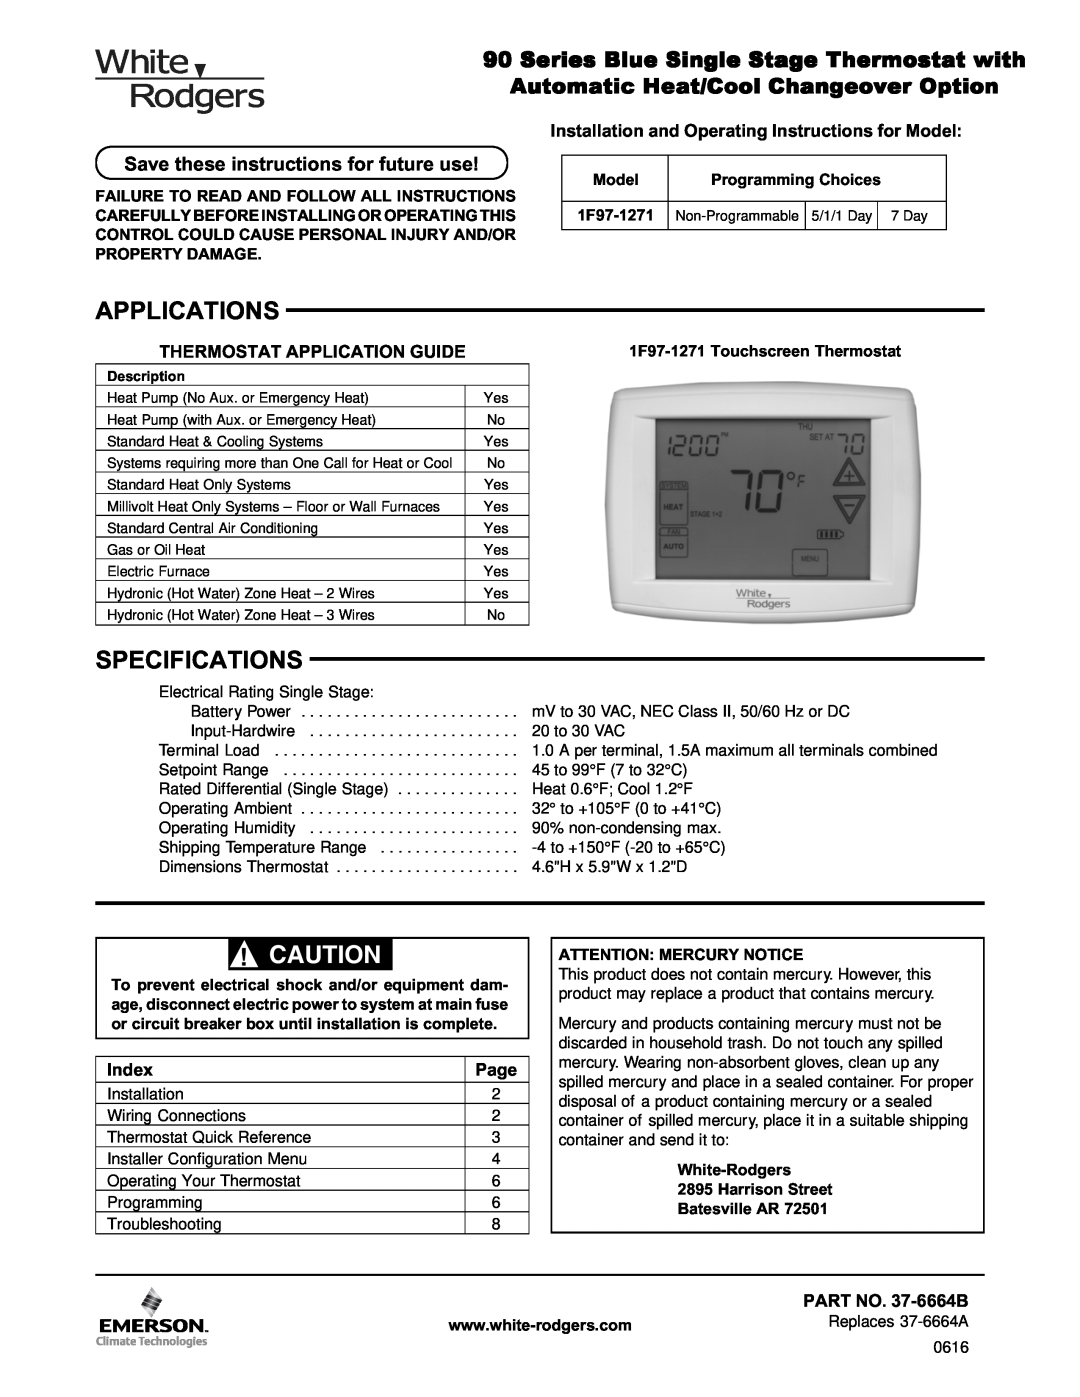 White Rodgers 1F97-1271 specifications Applications, Specifications, Series Blue Single Stage Thermostat with, Index, Page 